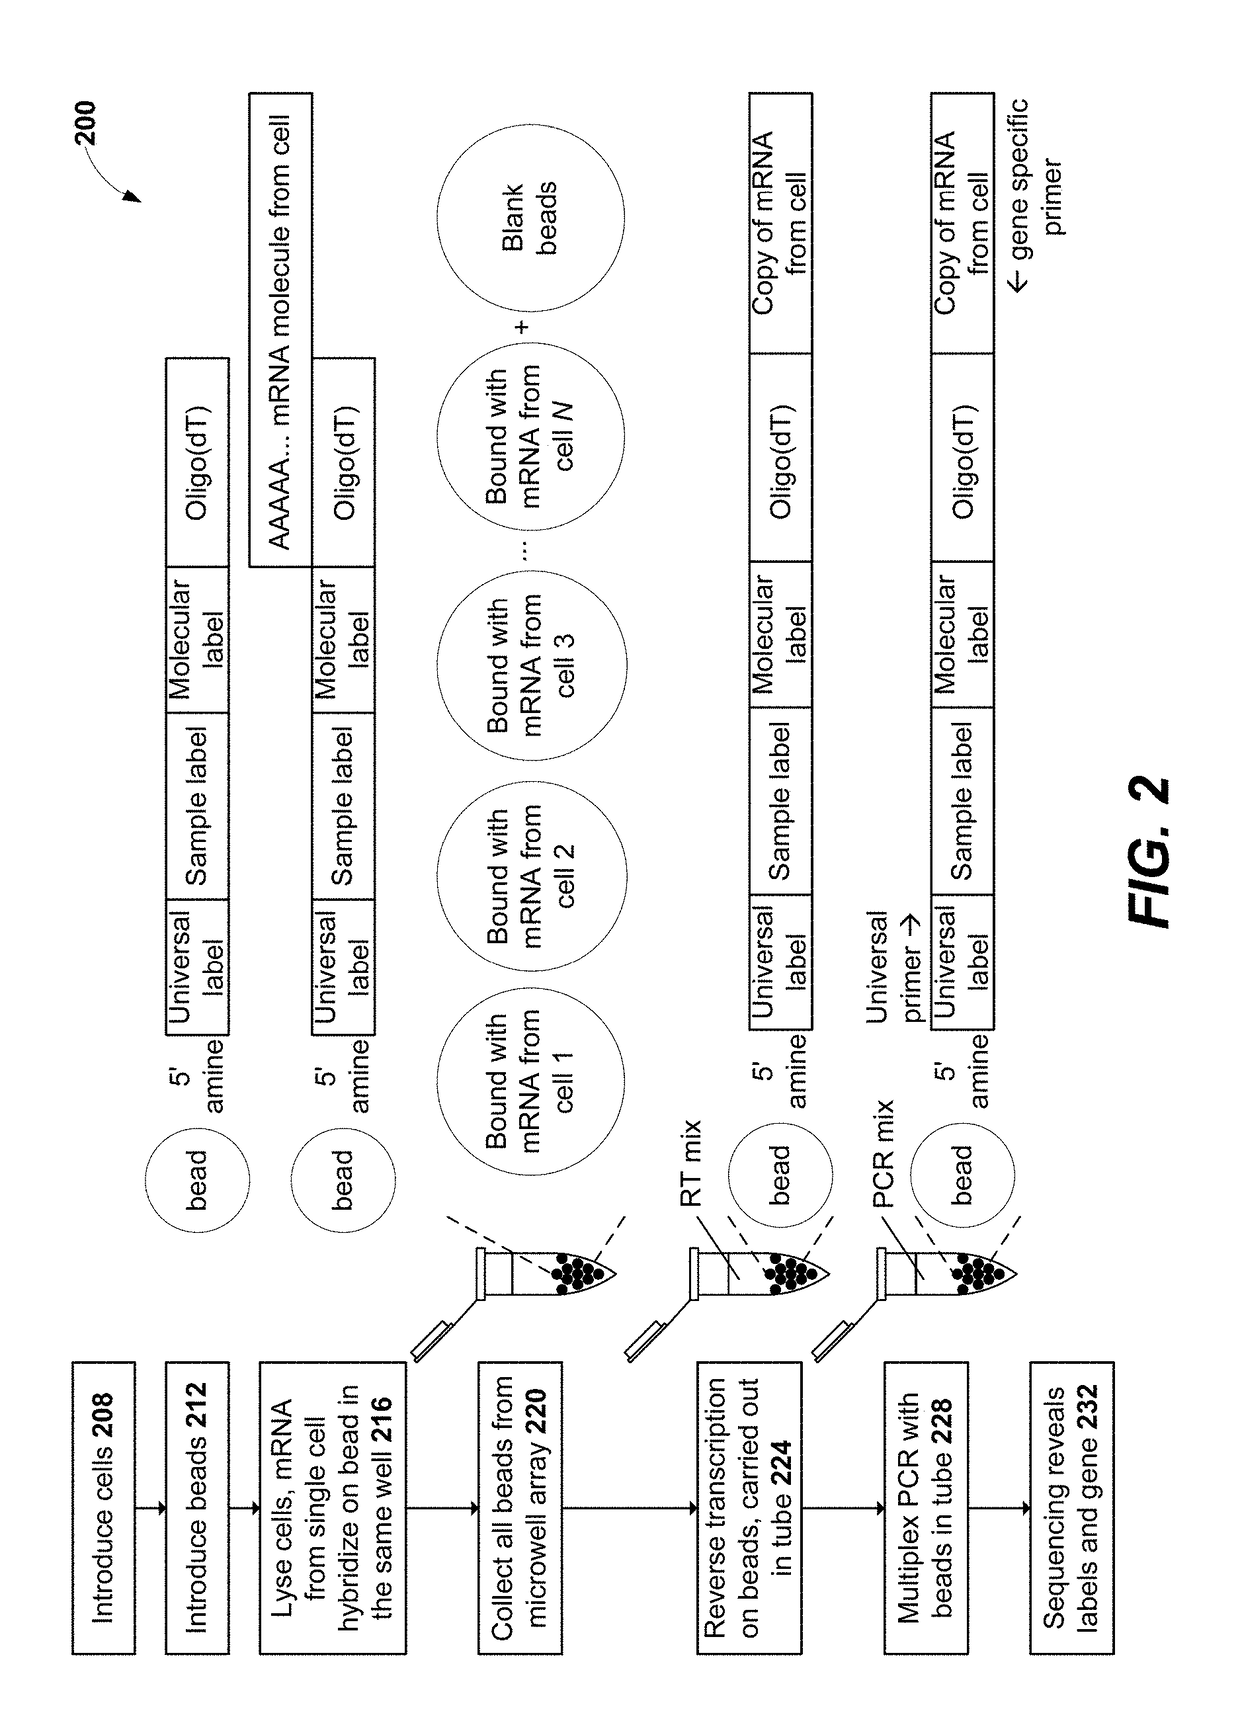 Measurement of protein expression using reagents with barcoded oligonucleotide sequences